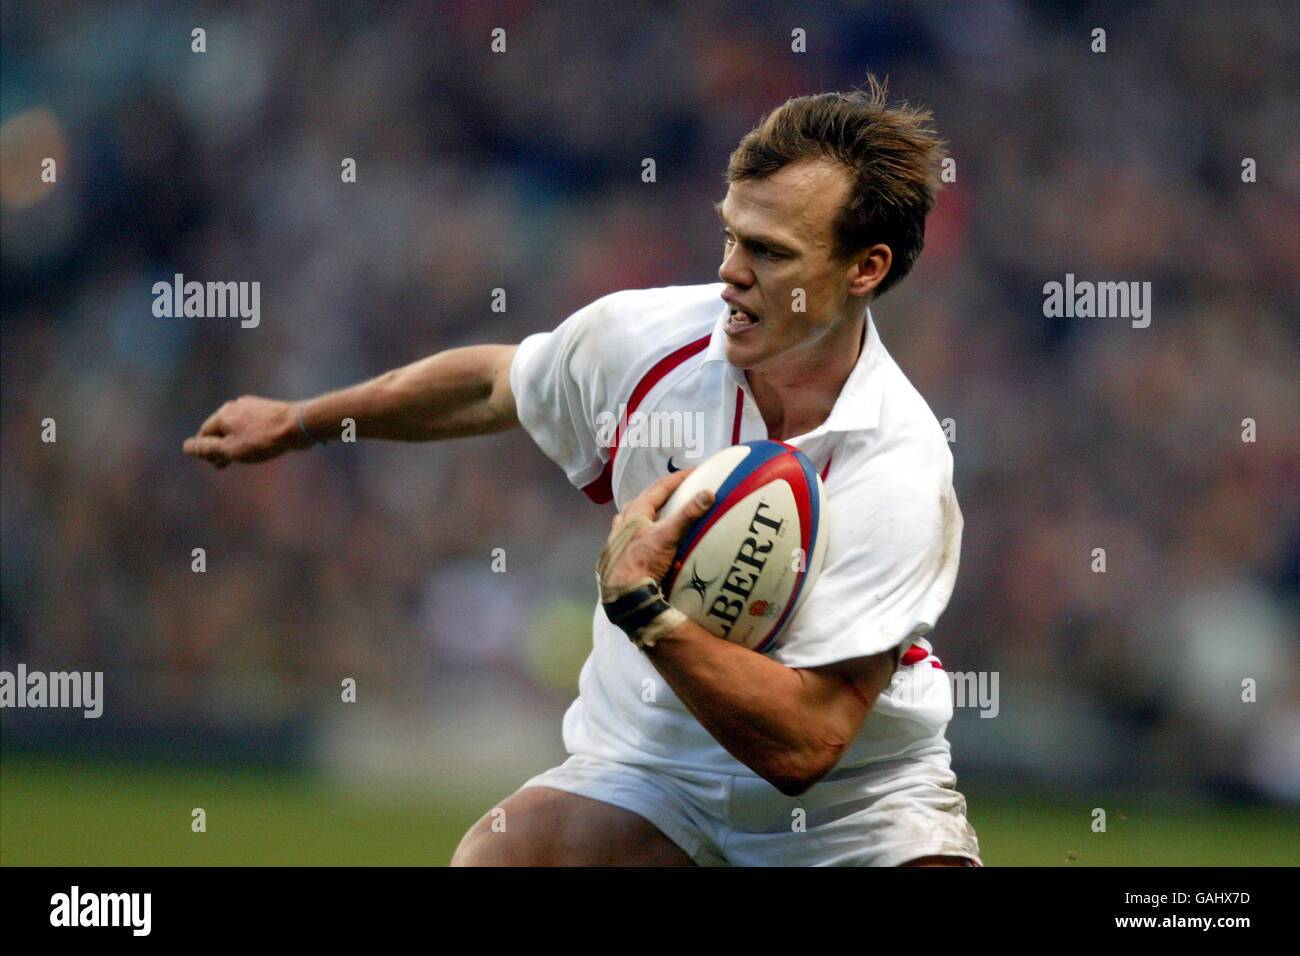 Rugby Union - International Friendly - England v South Africa. Phil Christophers, England Stock Photo